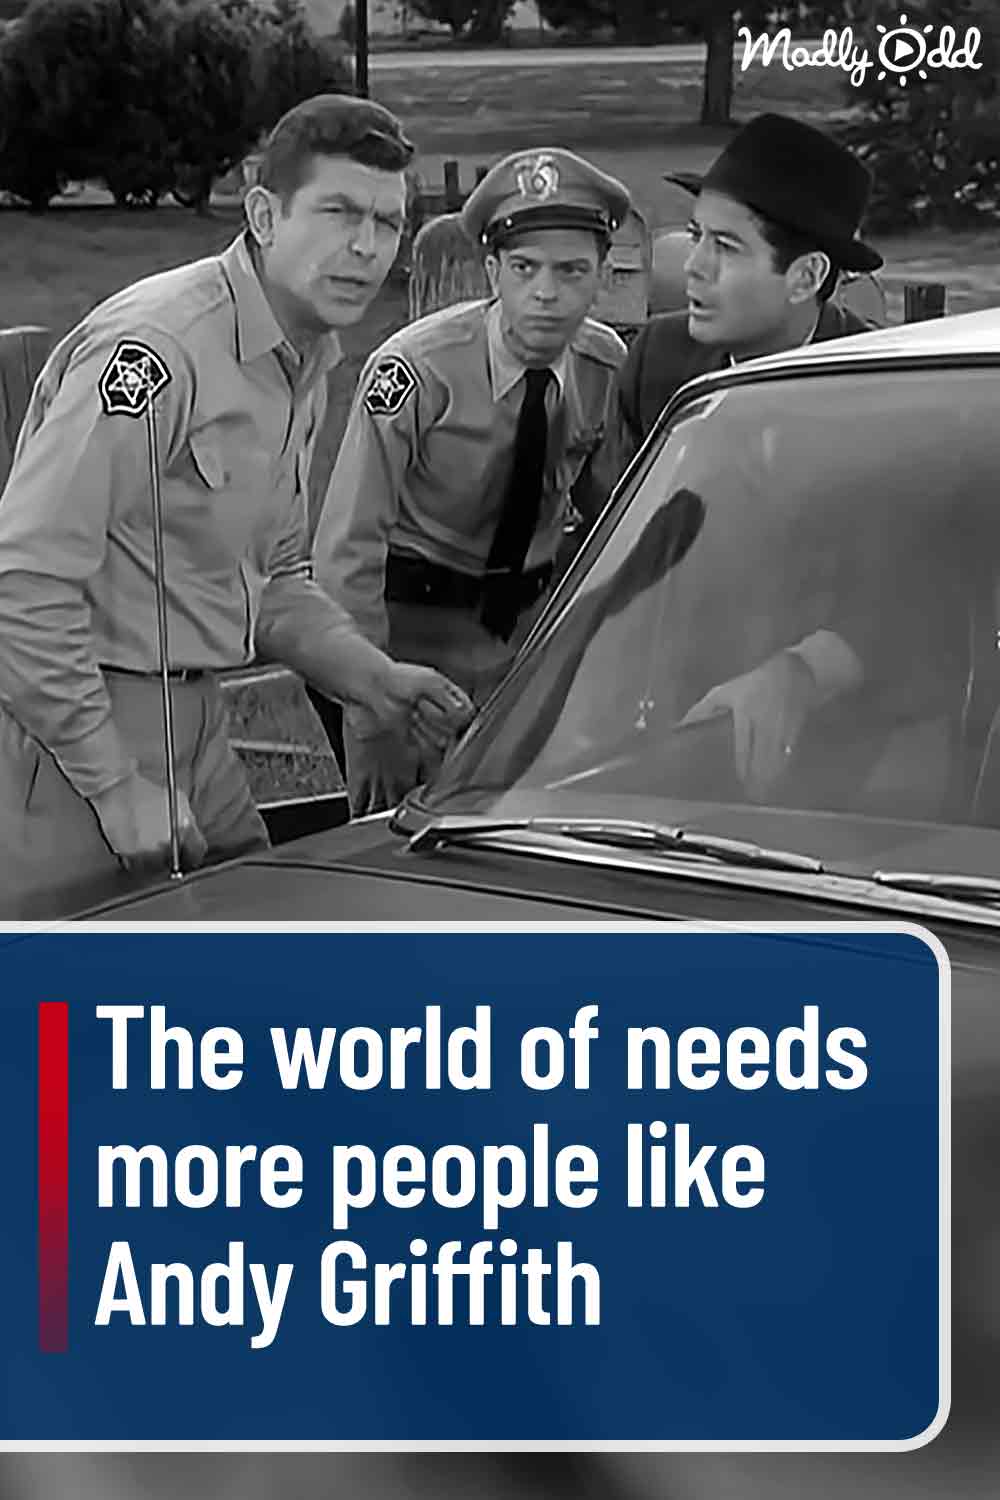 The world of needs more people like Andy Griffith